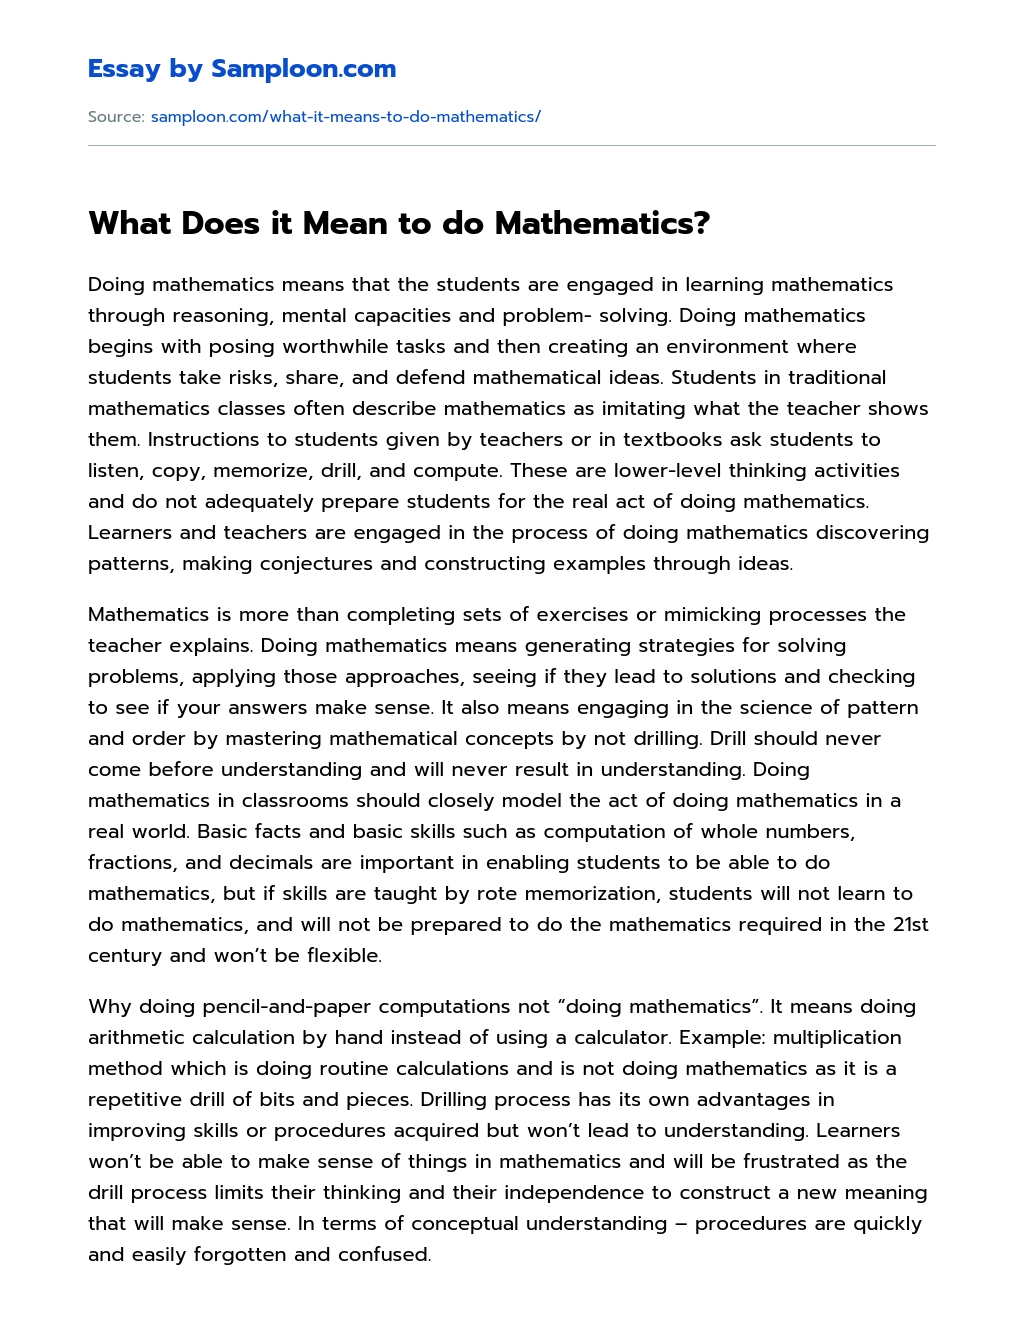 What Does it Mean to do Mathematics? essay